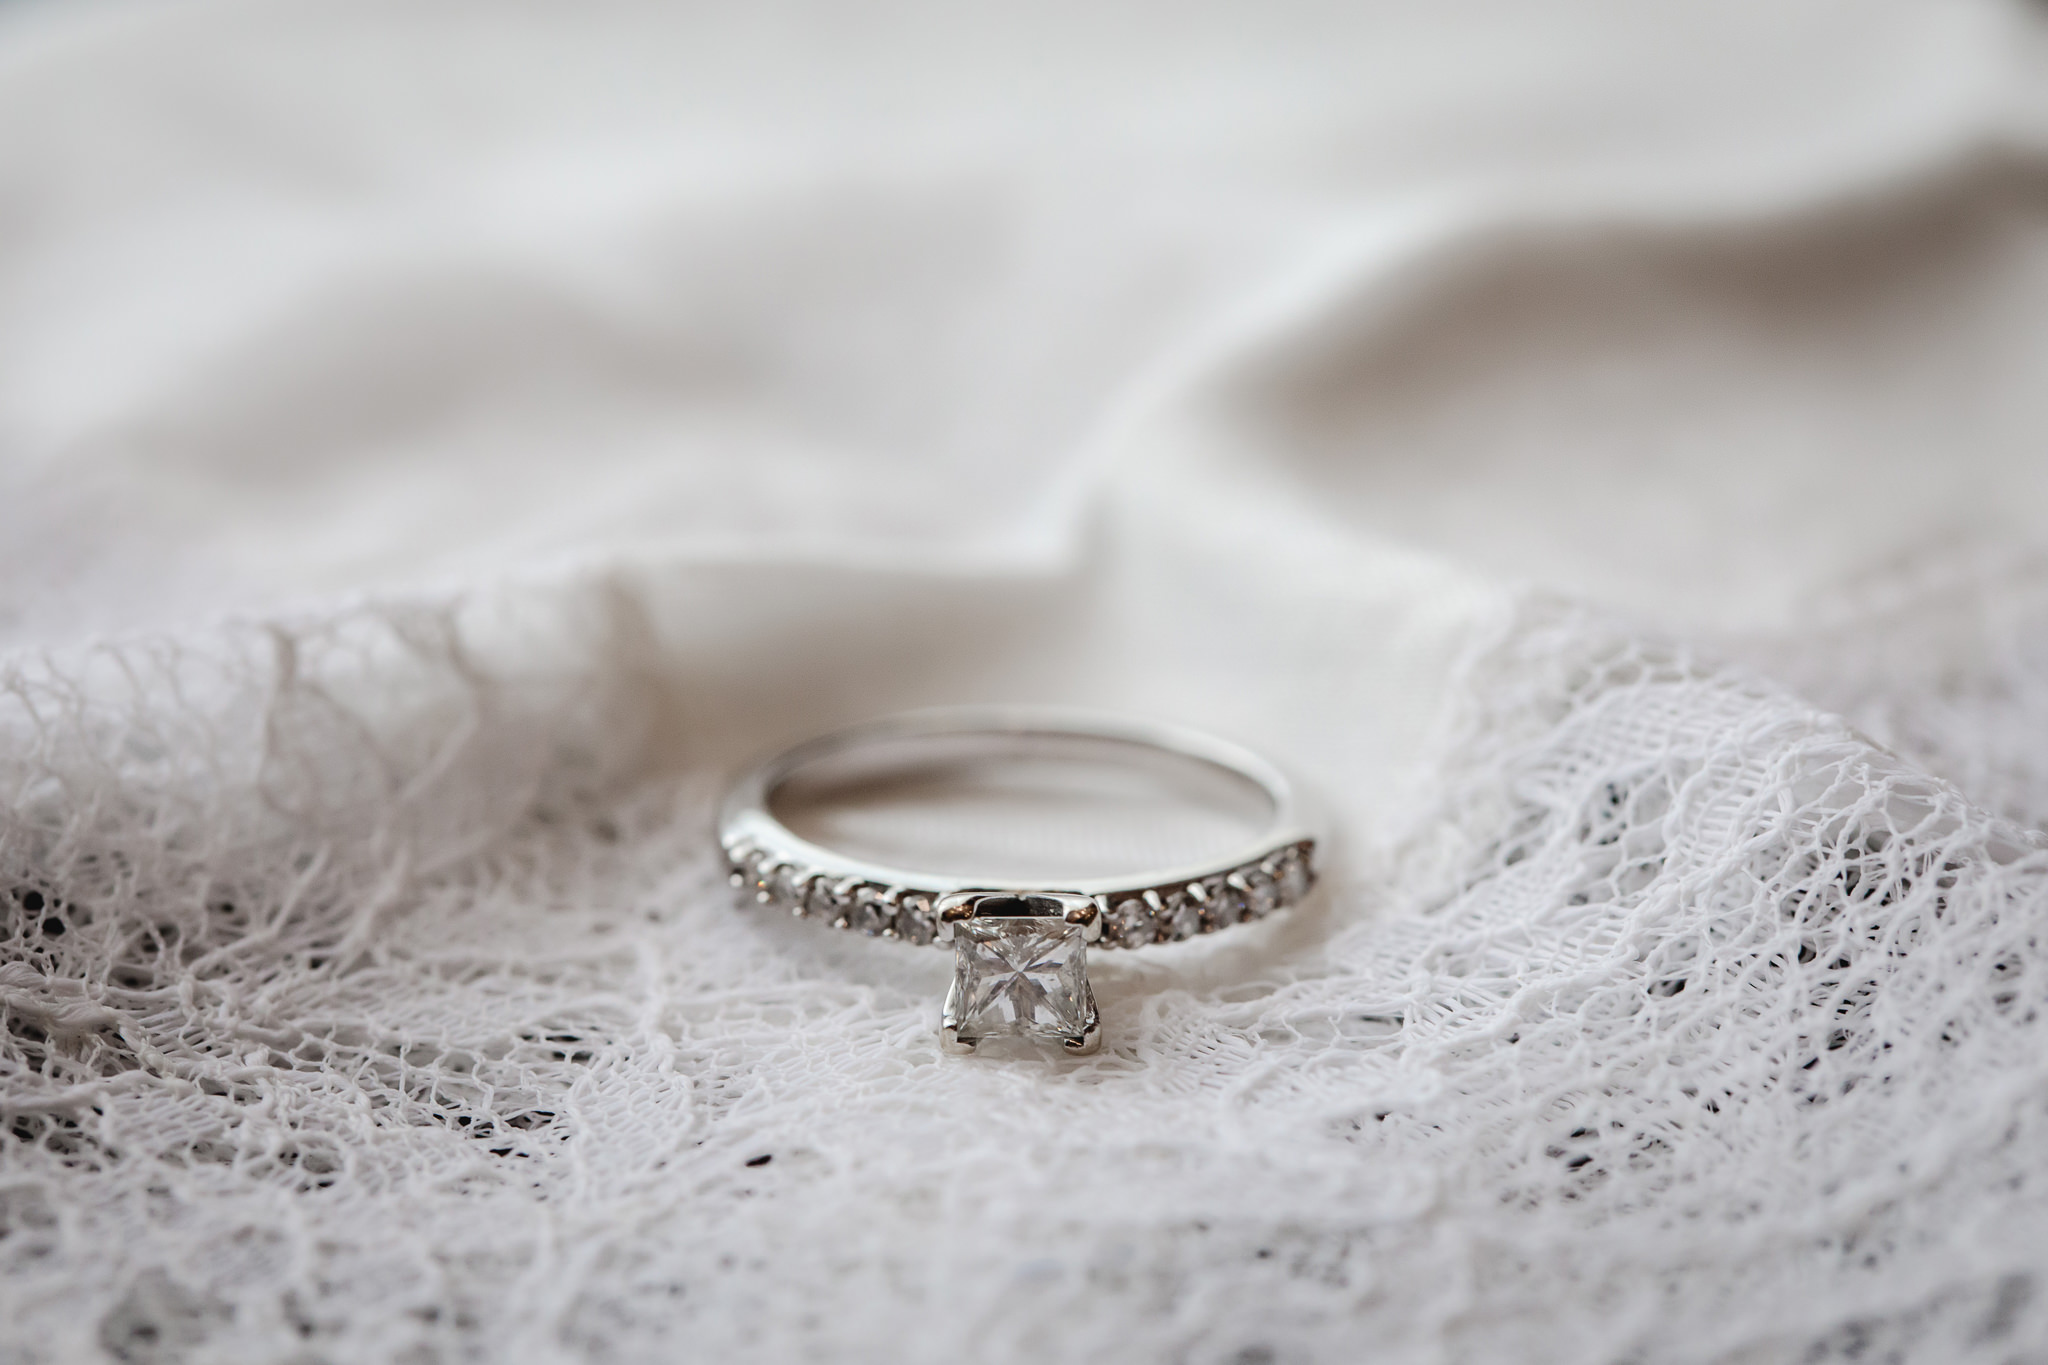 Solitary diamond engagement ring rests on a white handkerchief